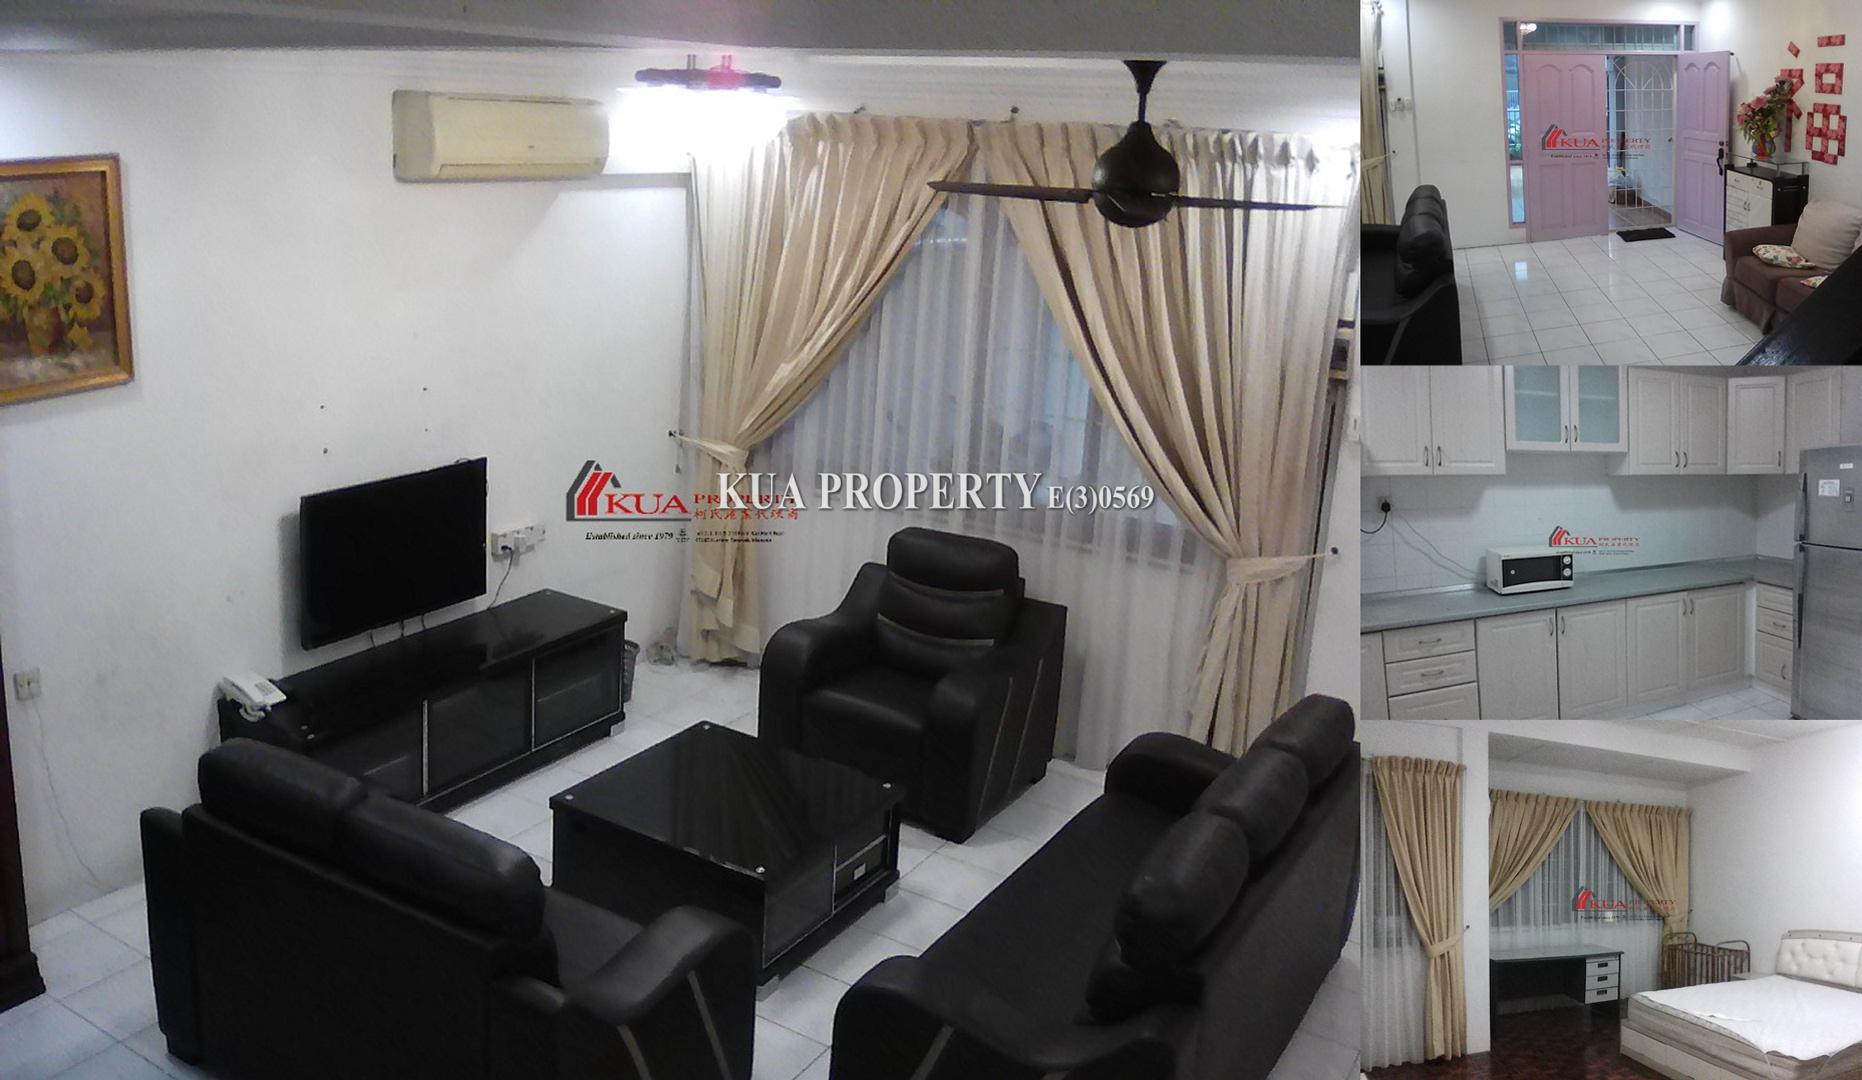 Double Storey Terrace Intermediate House For Rent!(Available End of March 2022) at Kenny Hill, Kuching